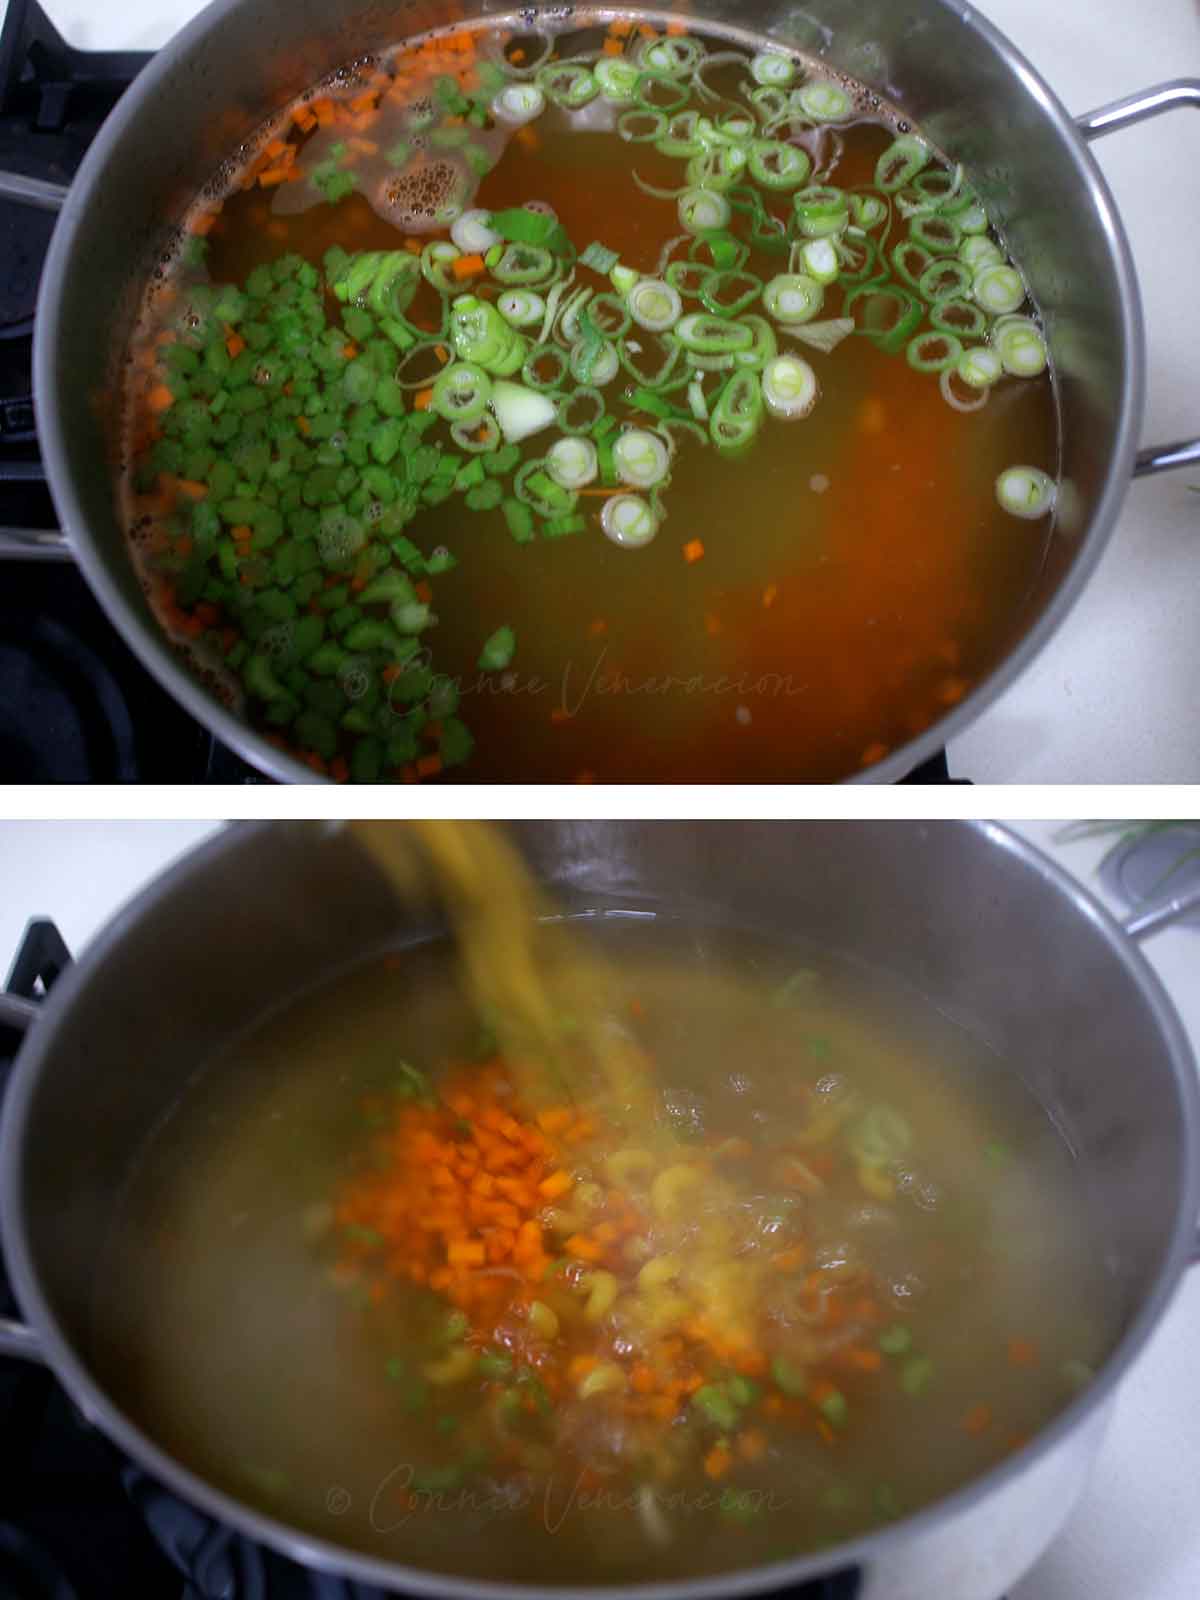 Boiling celery, carrot and leeks in broth before adding macaroni